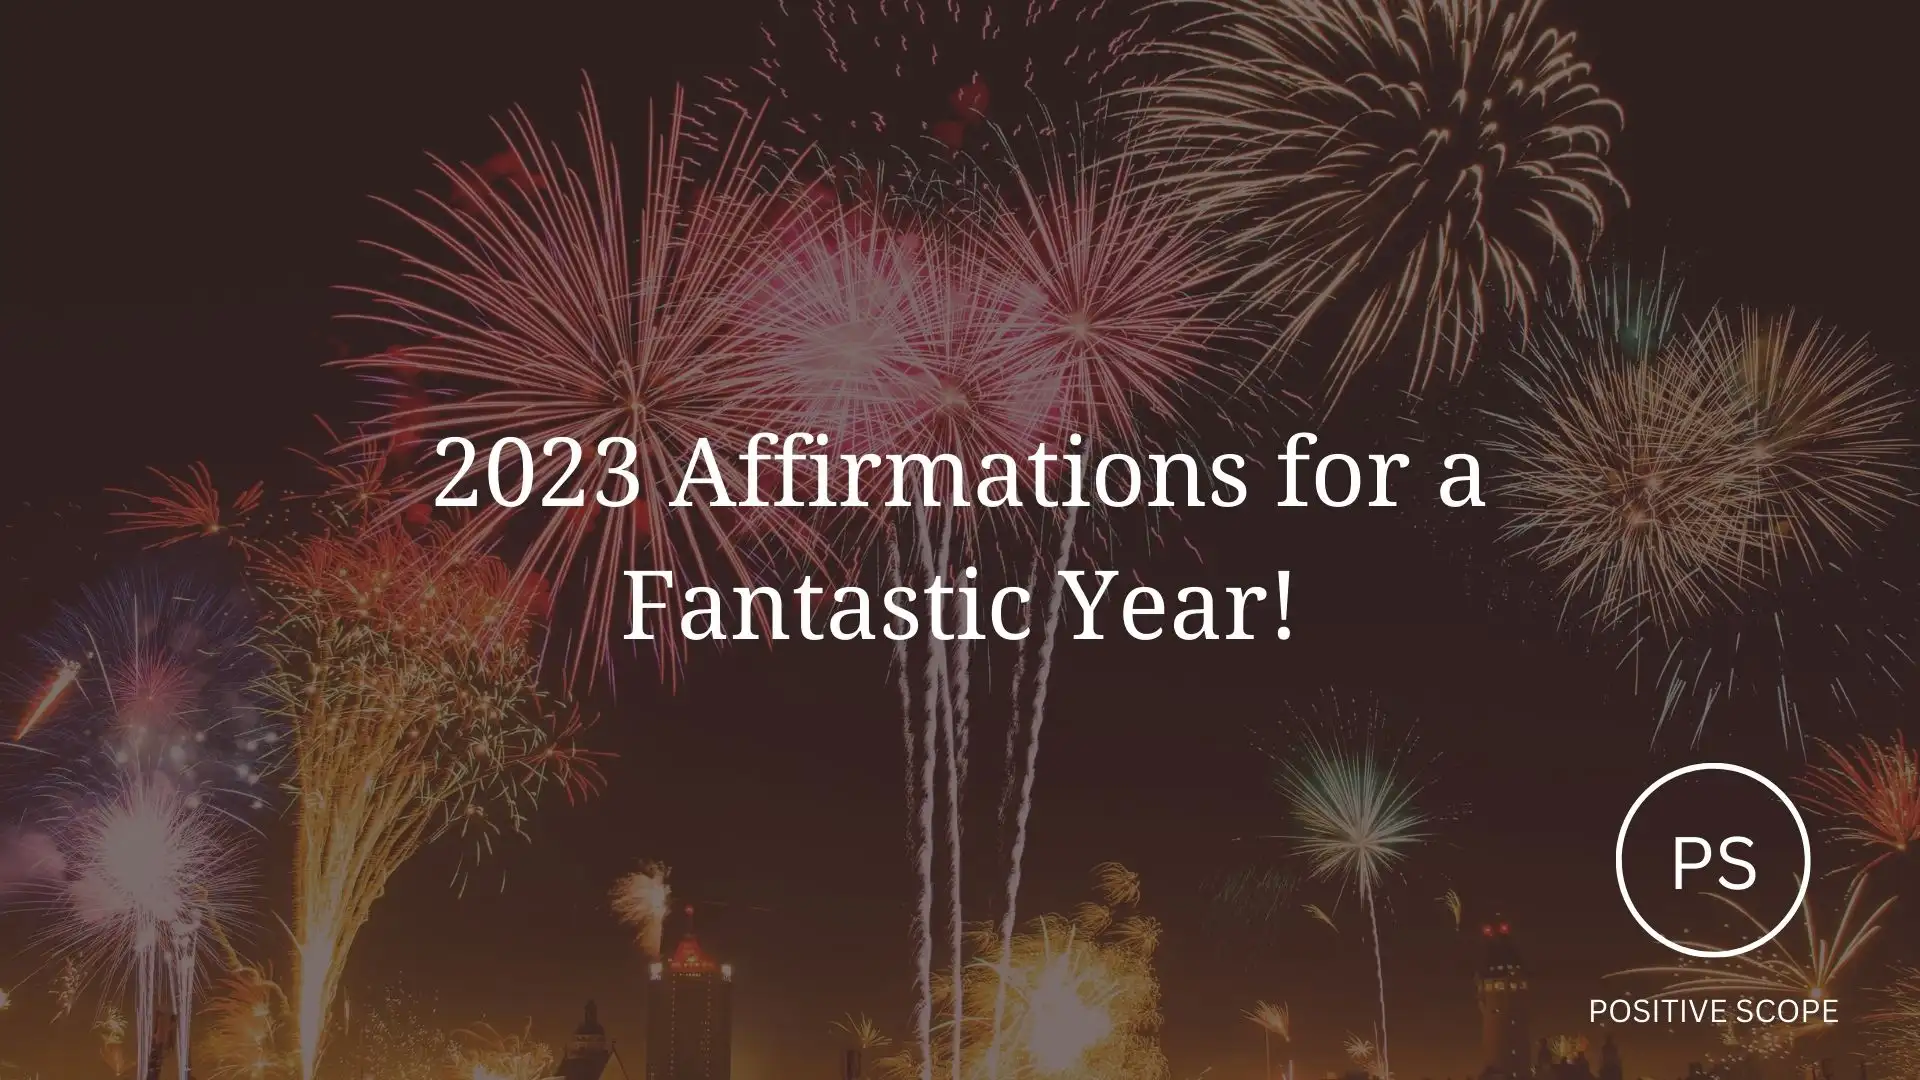 2023 Affirmations for a Fantastic Year!